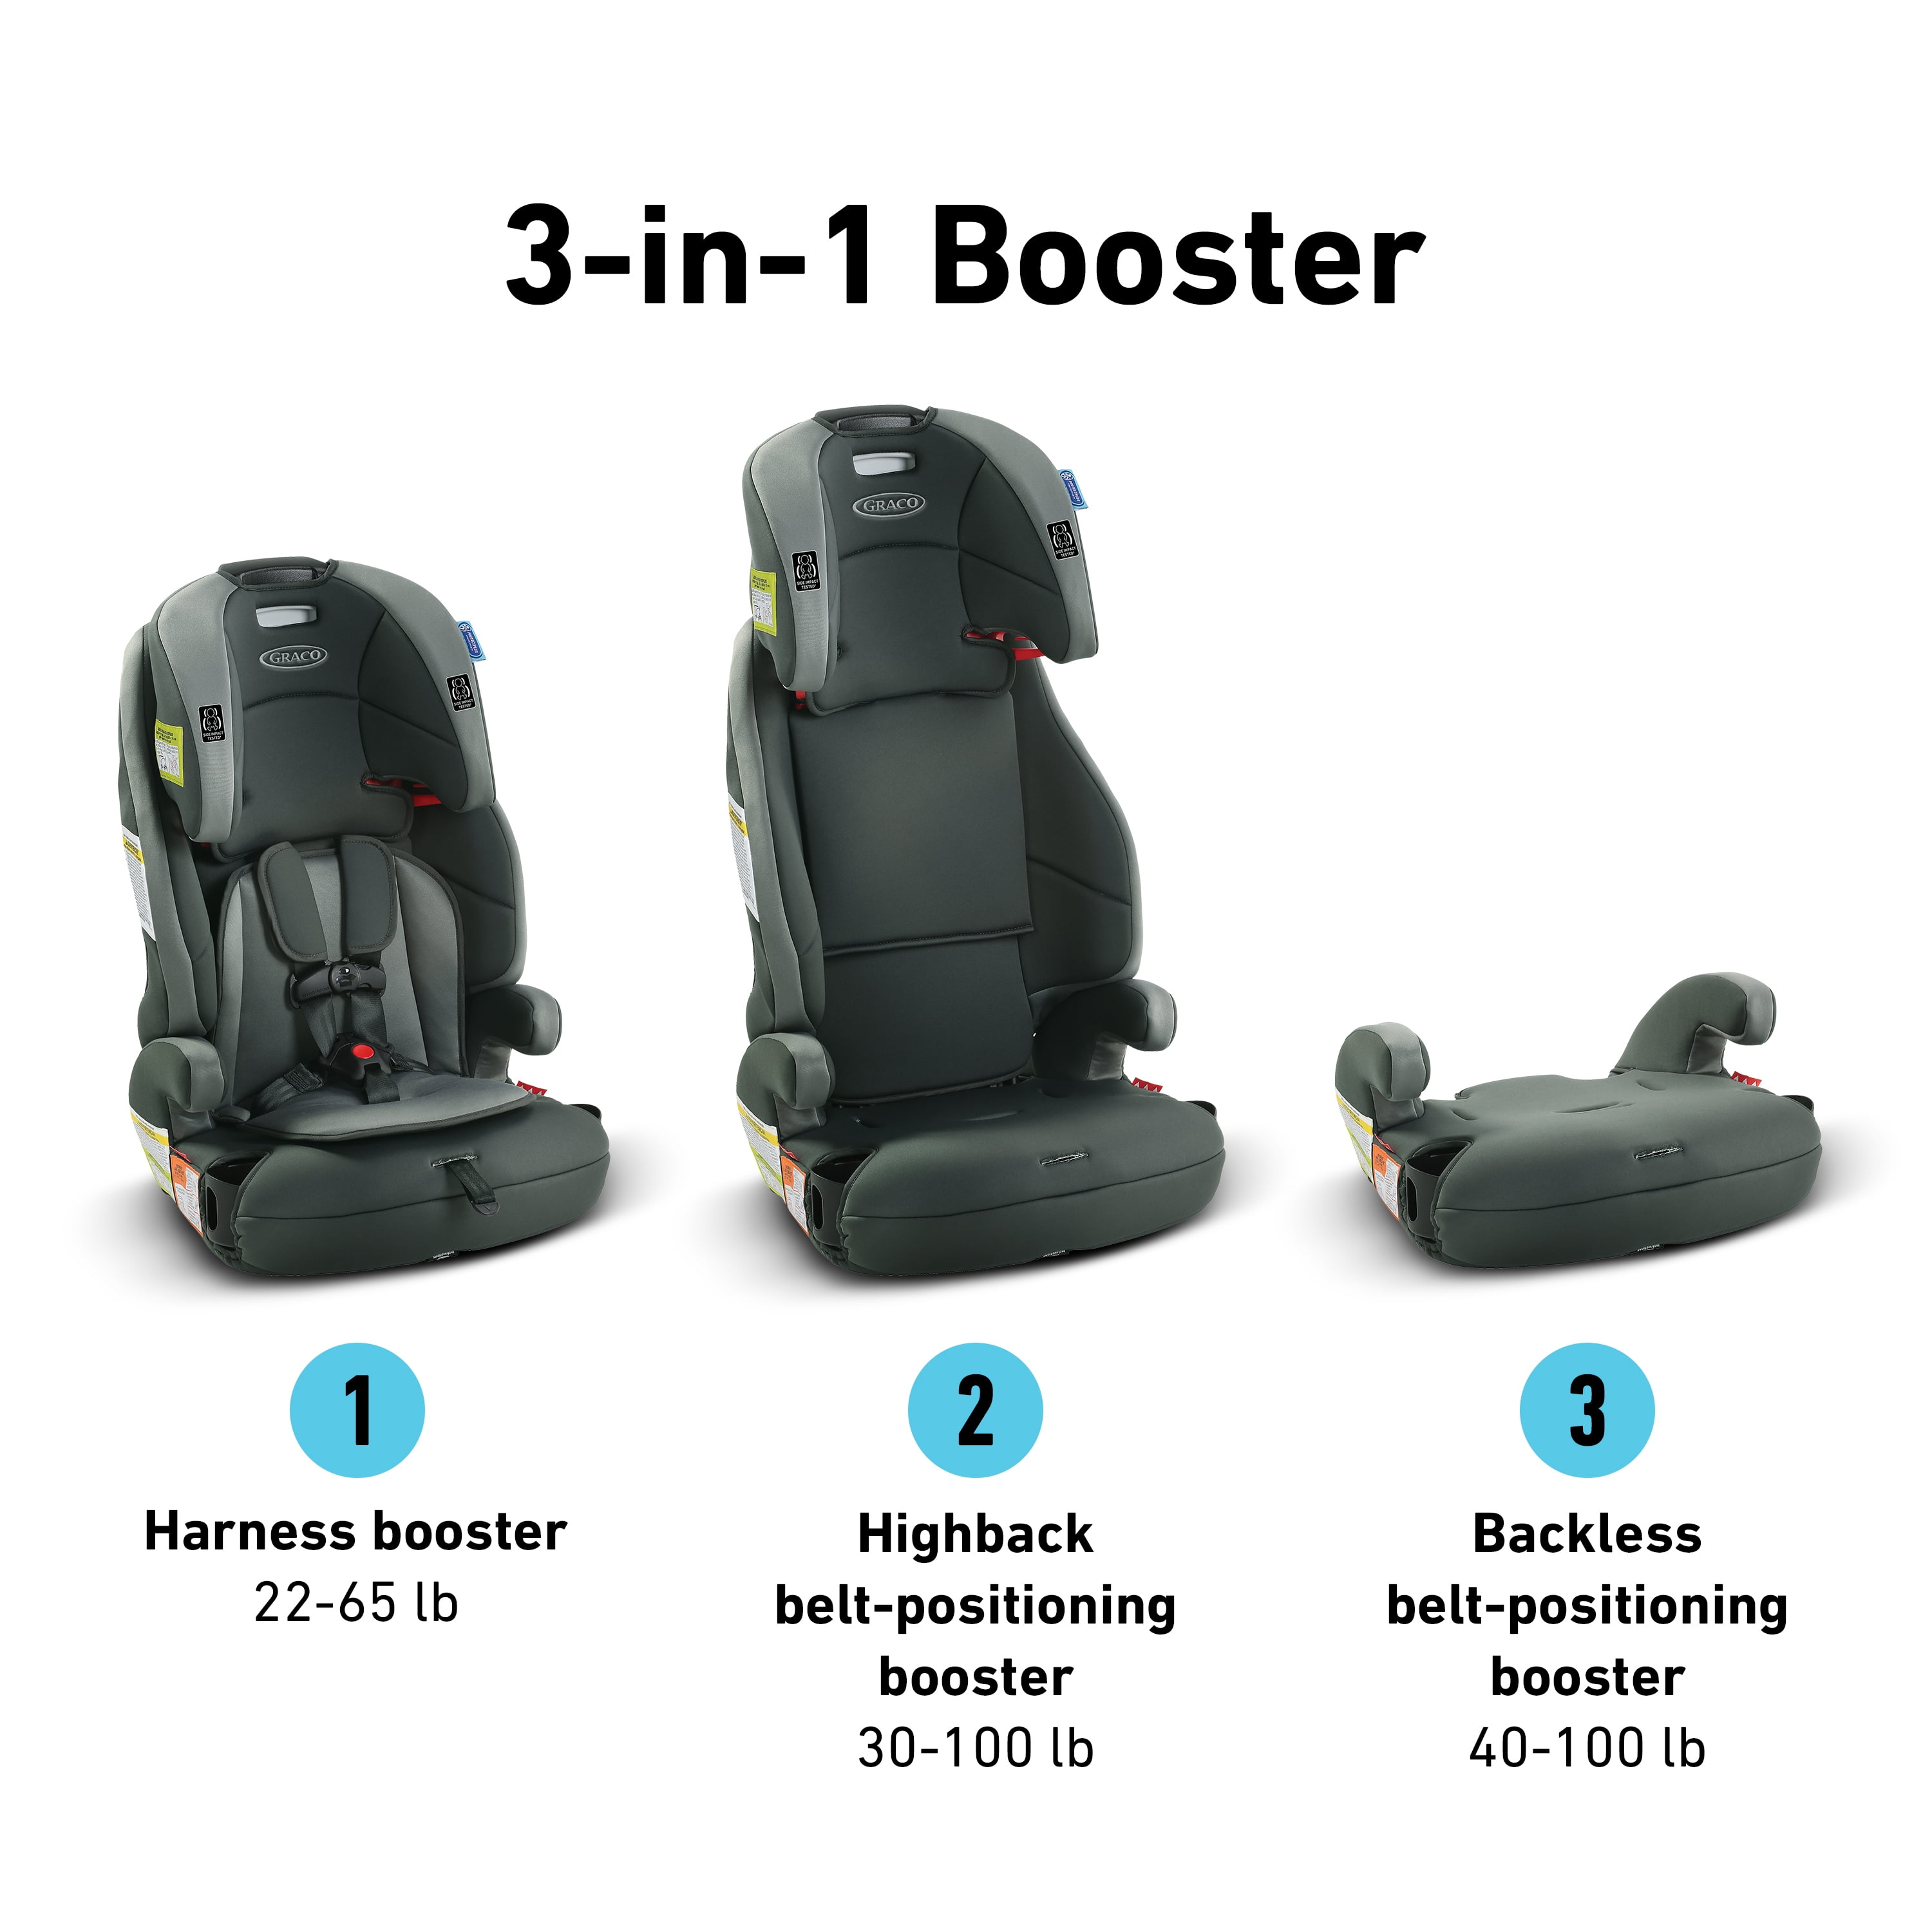 graco tranzitions 3 in 1 harness booster seat